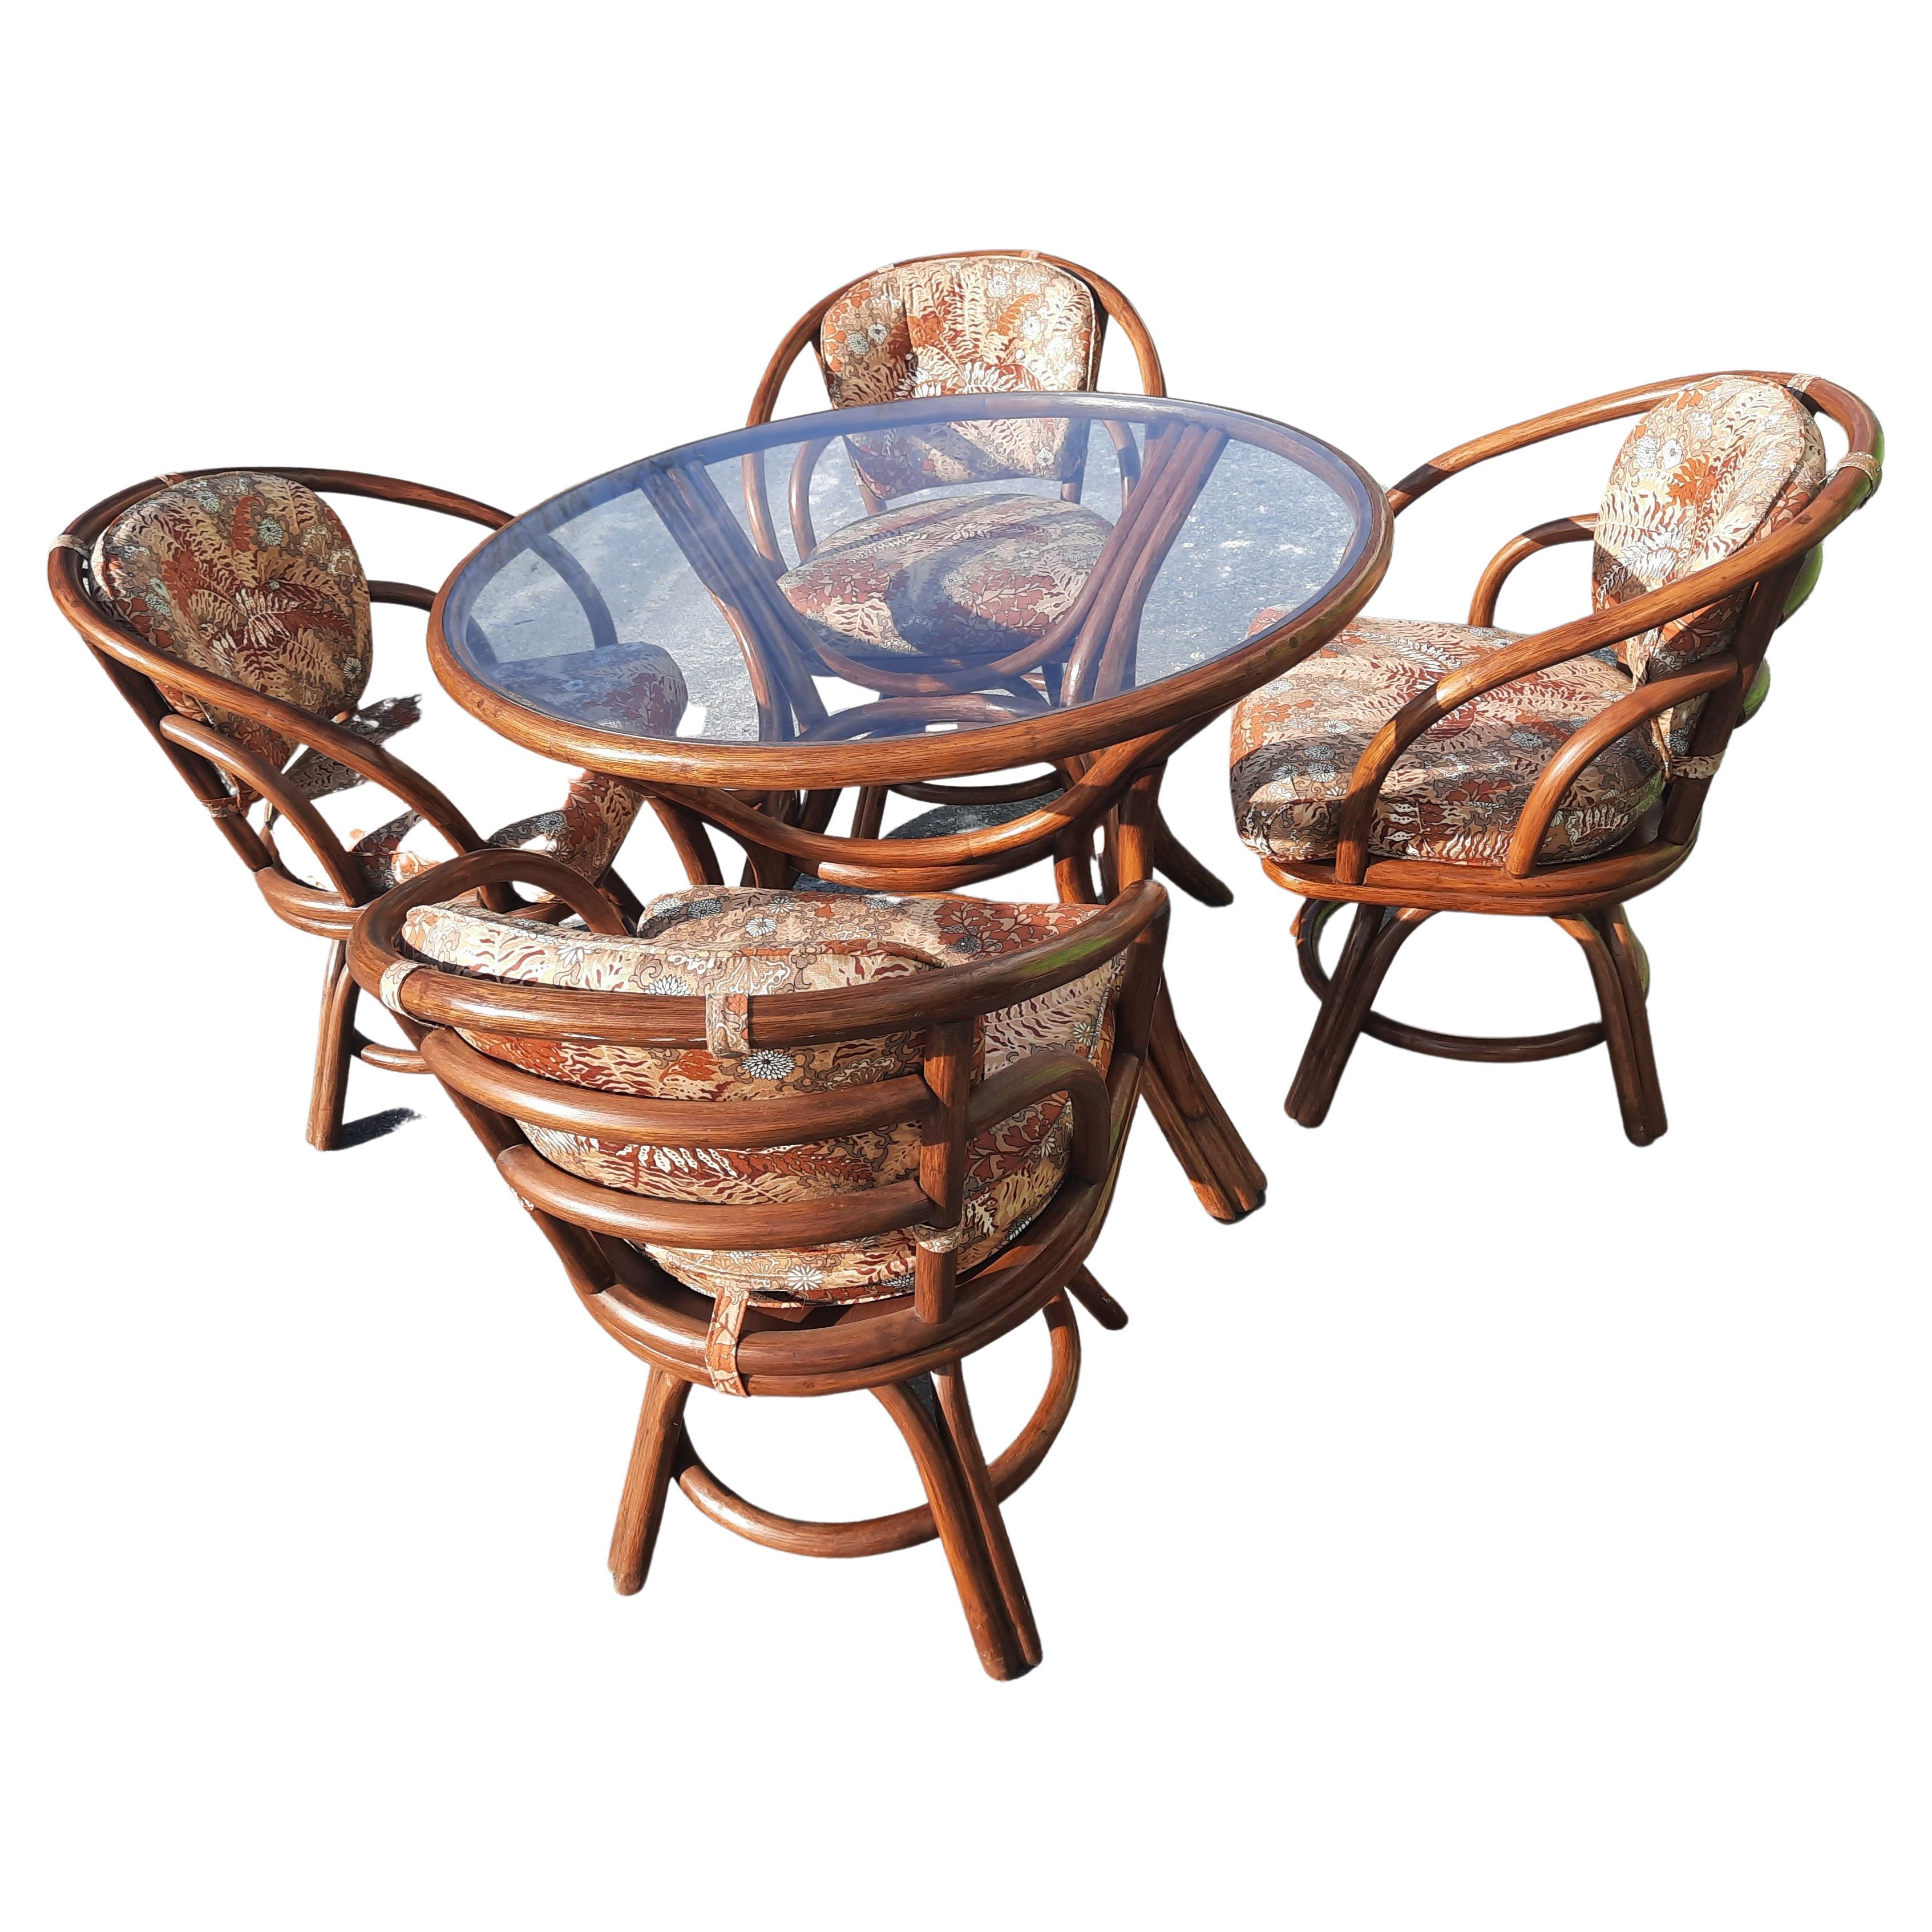 This is a stylish Rattan bentwood deco style dining or patio table and 4 chair set by Brown Jordan. It has the look of faux bamboo. Set in excellent condition. Features a glass top and arched bentwood base with an open design. The Beautiful design